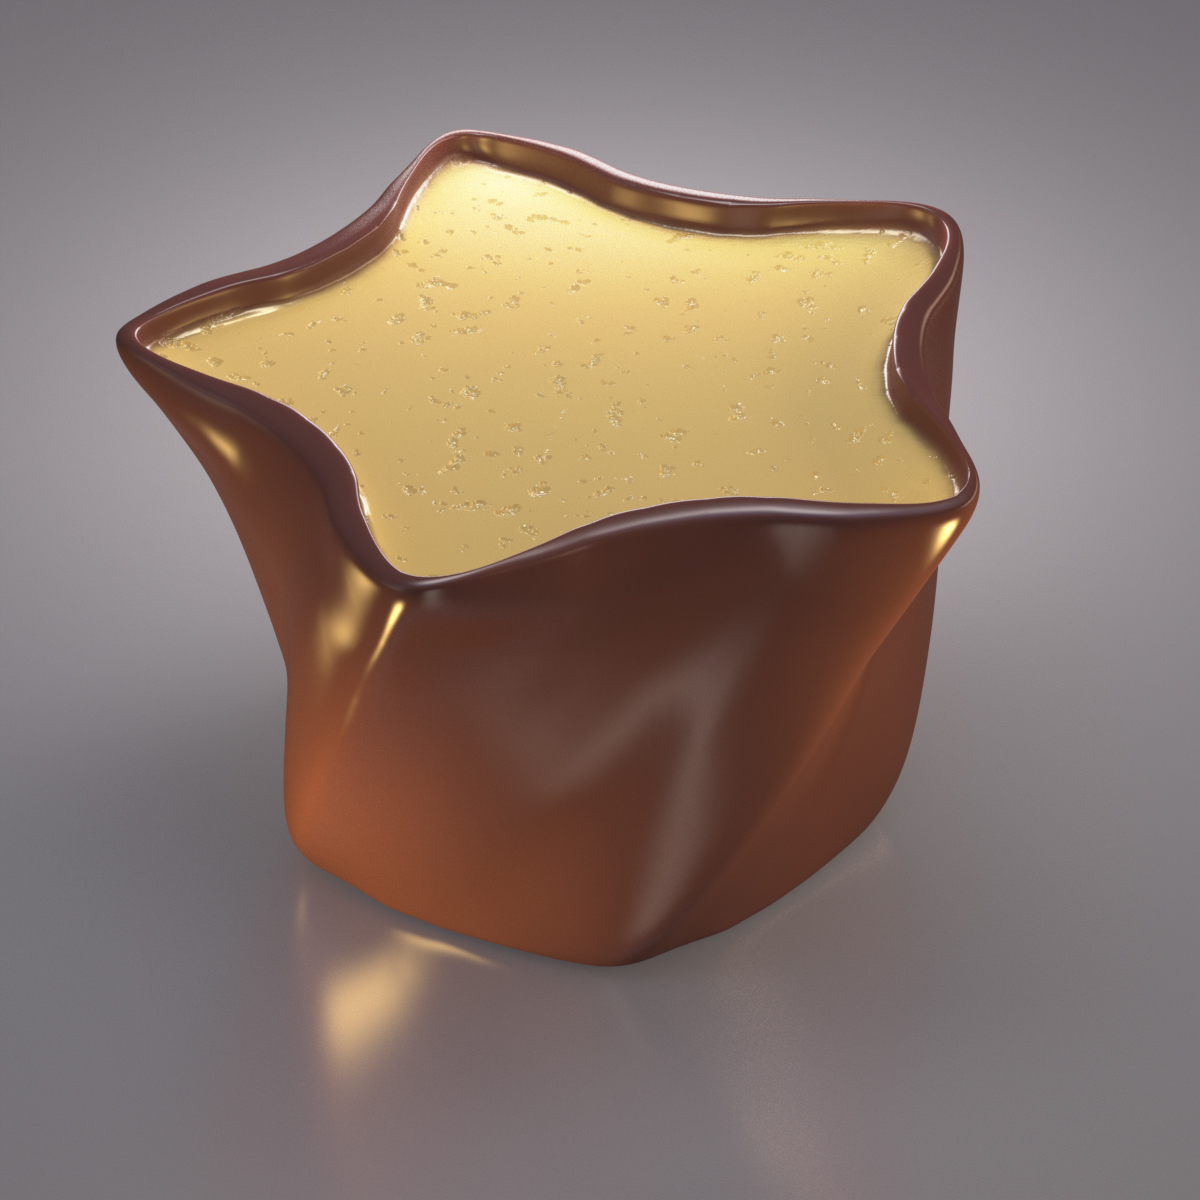 Lindt CGI chocolate yummy Good nuts foil almonds almond Coffee caramel gold golden